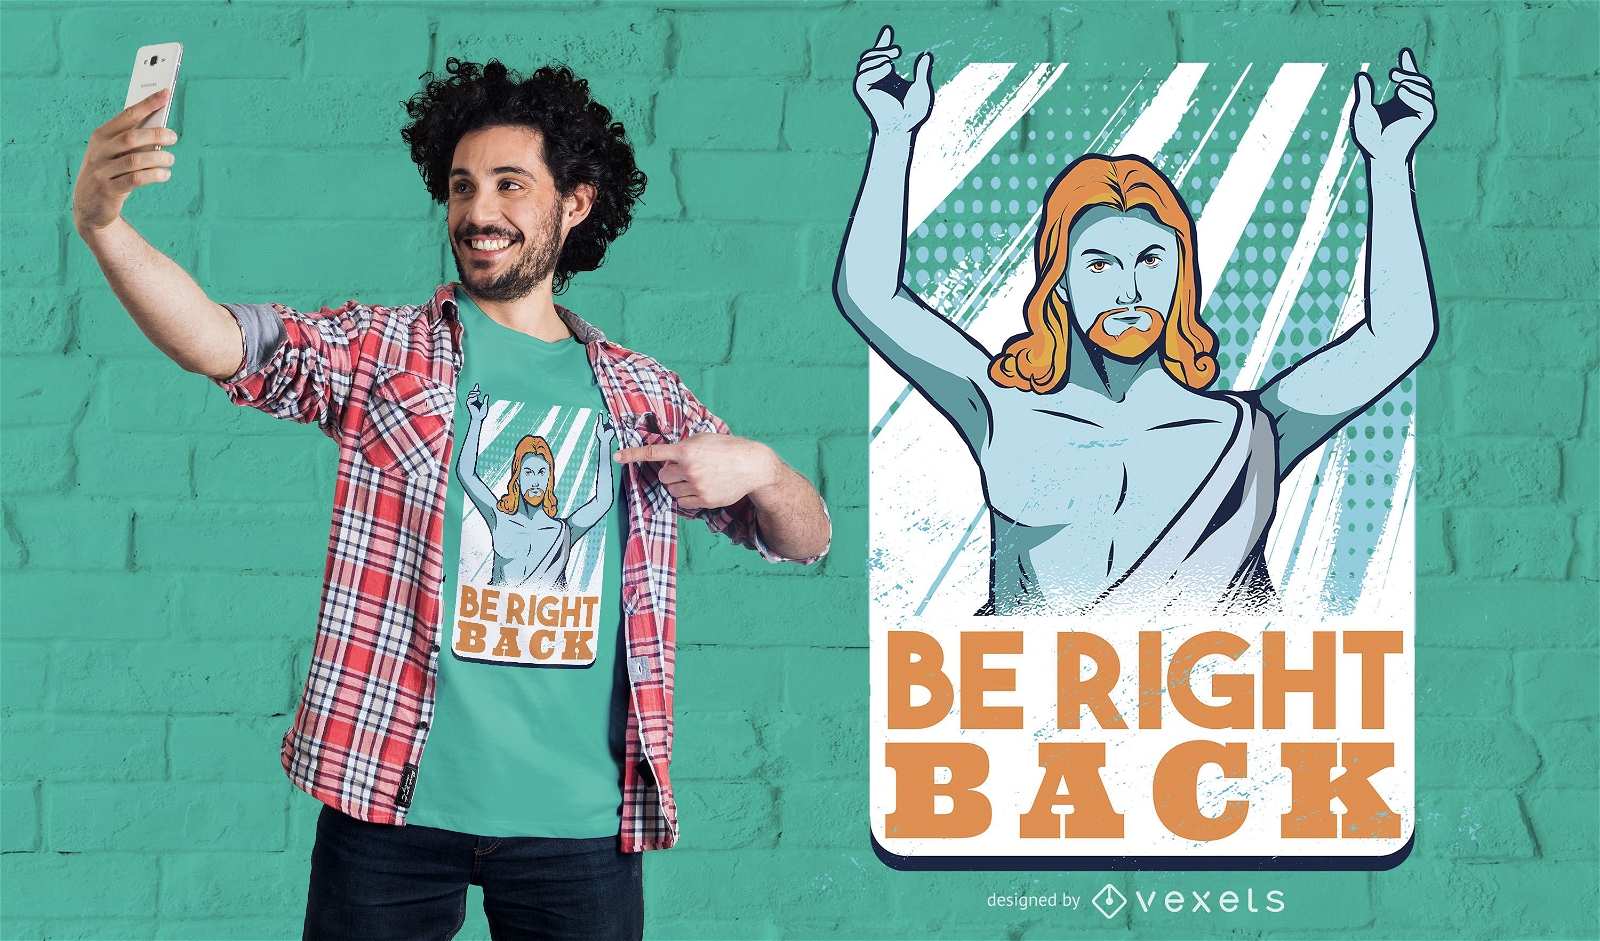 Be right back t-shirt design